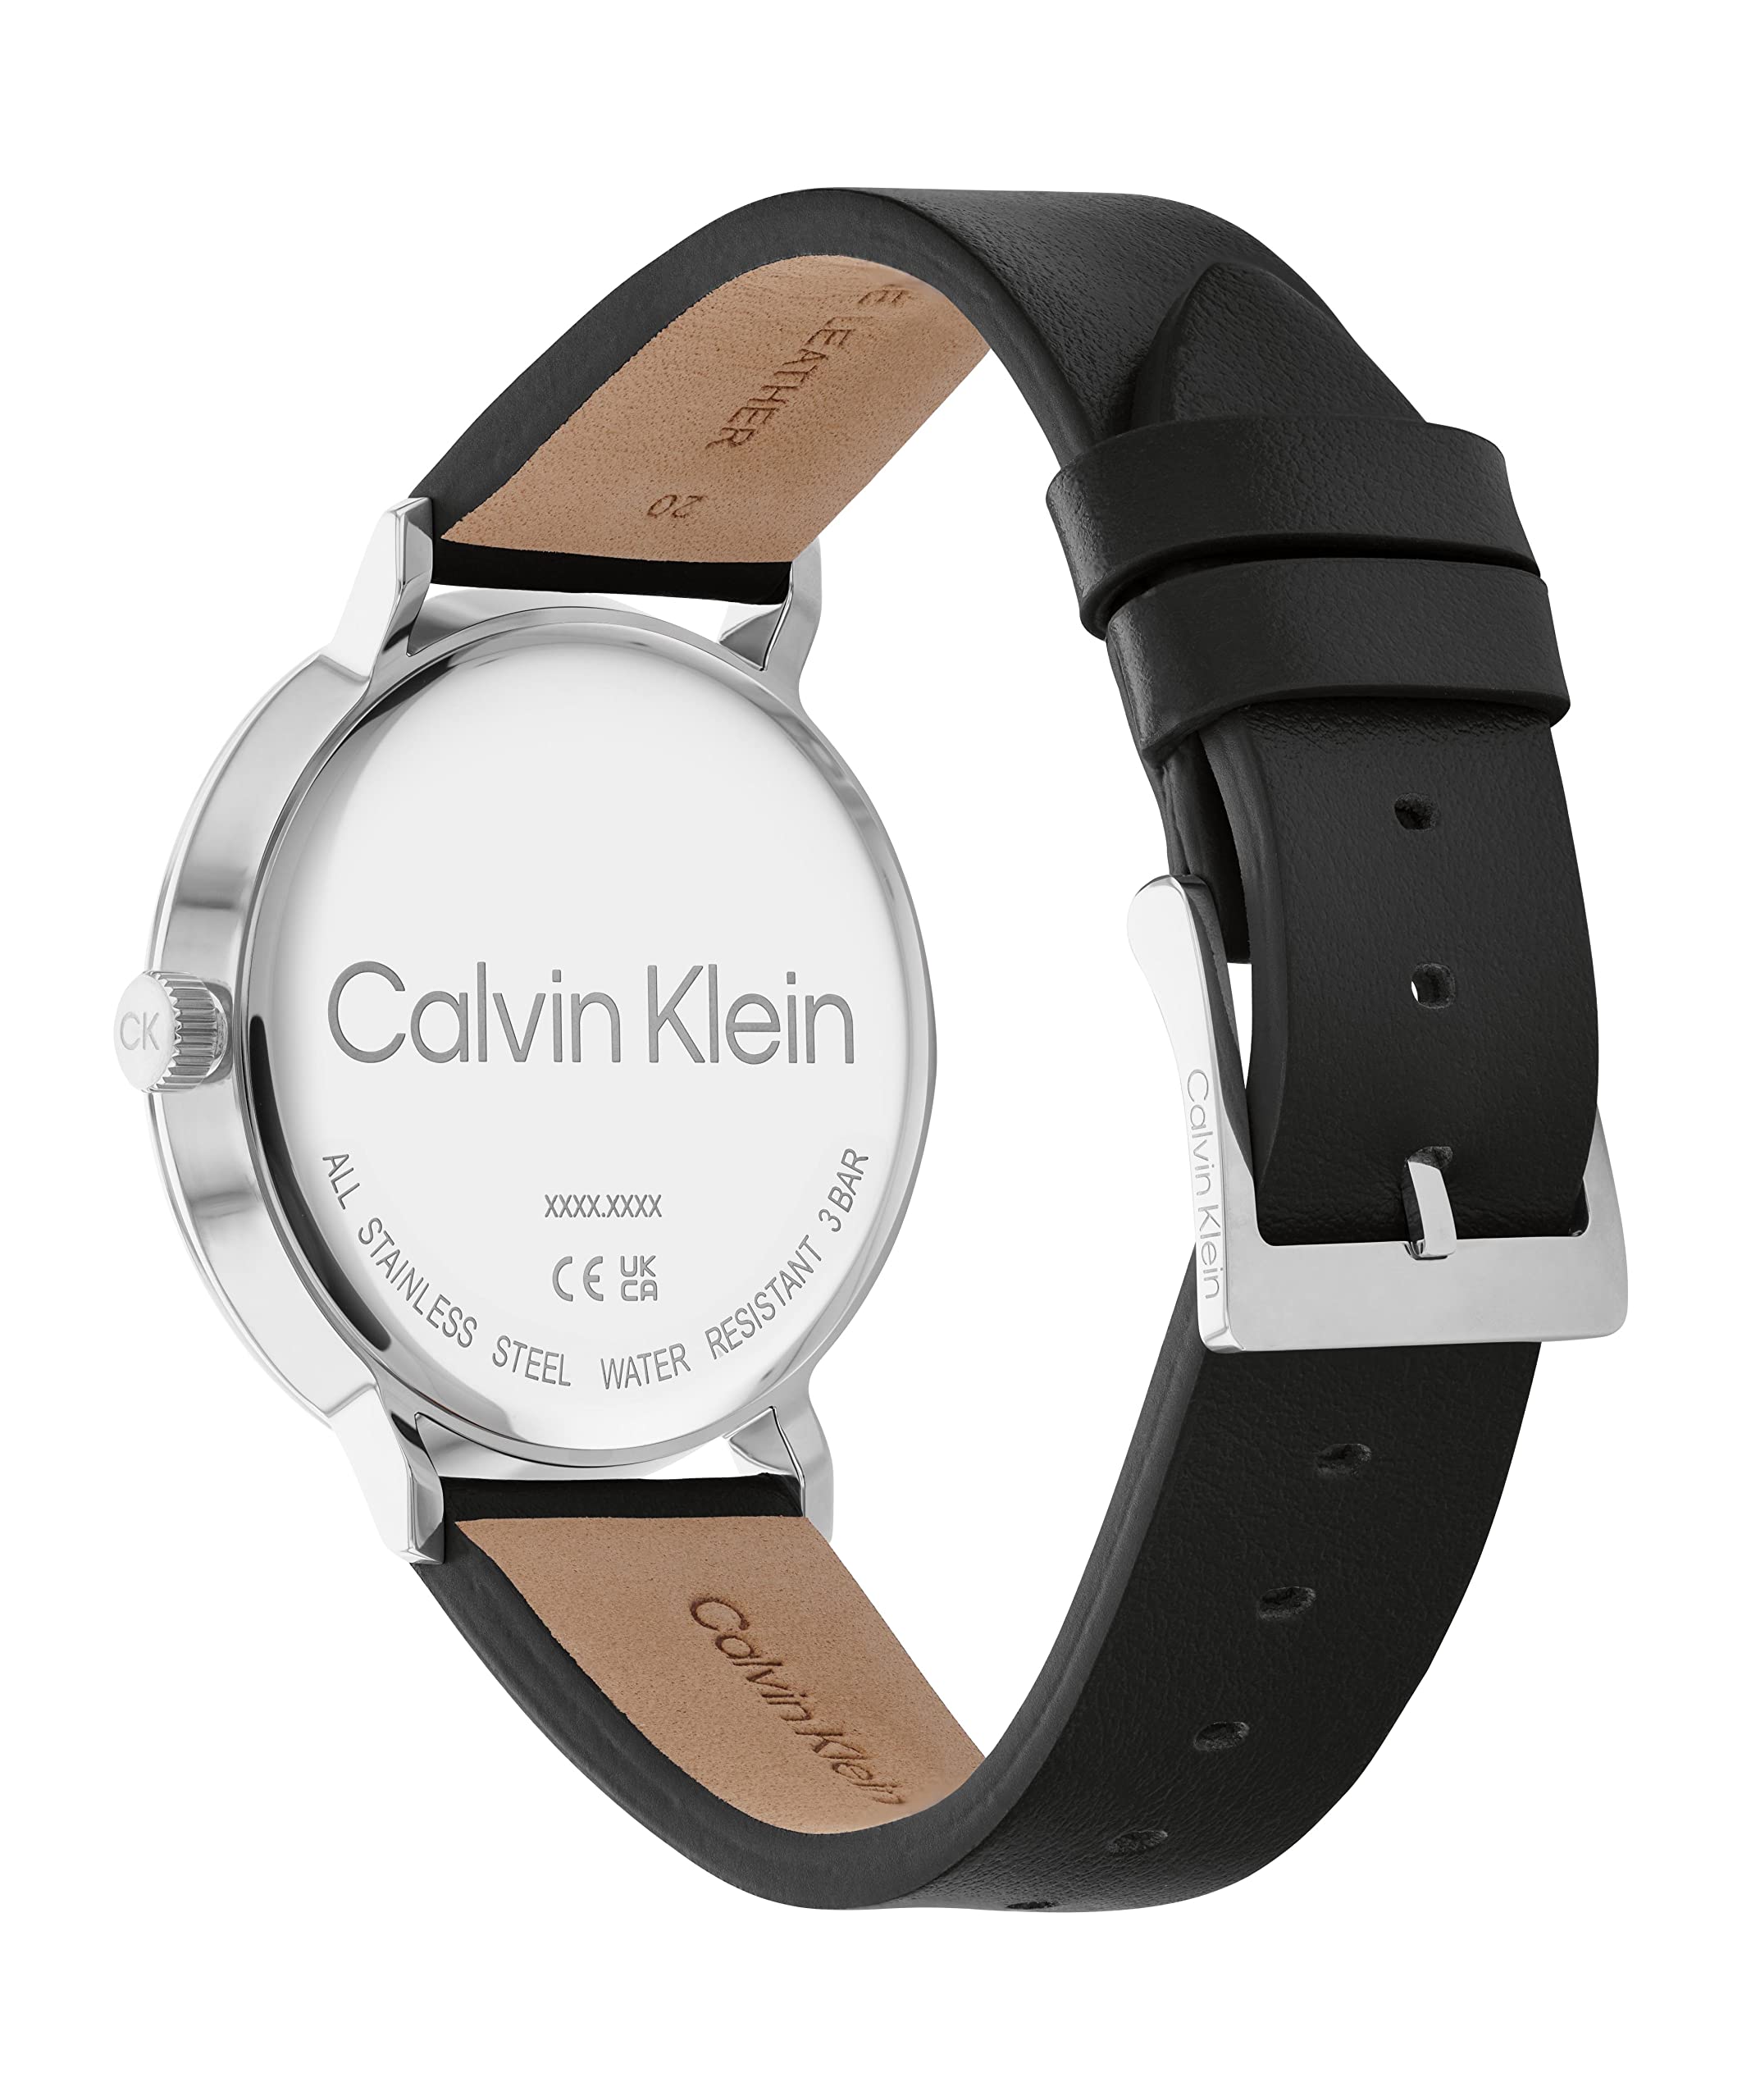 Calvin Klein Men's Quartz Stainless Steel and Leather Strap Watch, Color: Black (Model: 25200050)